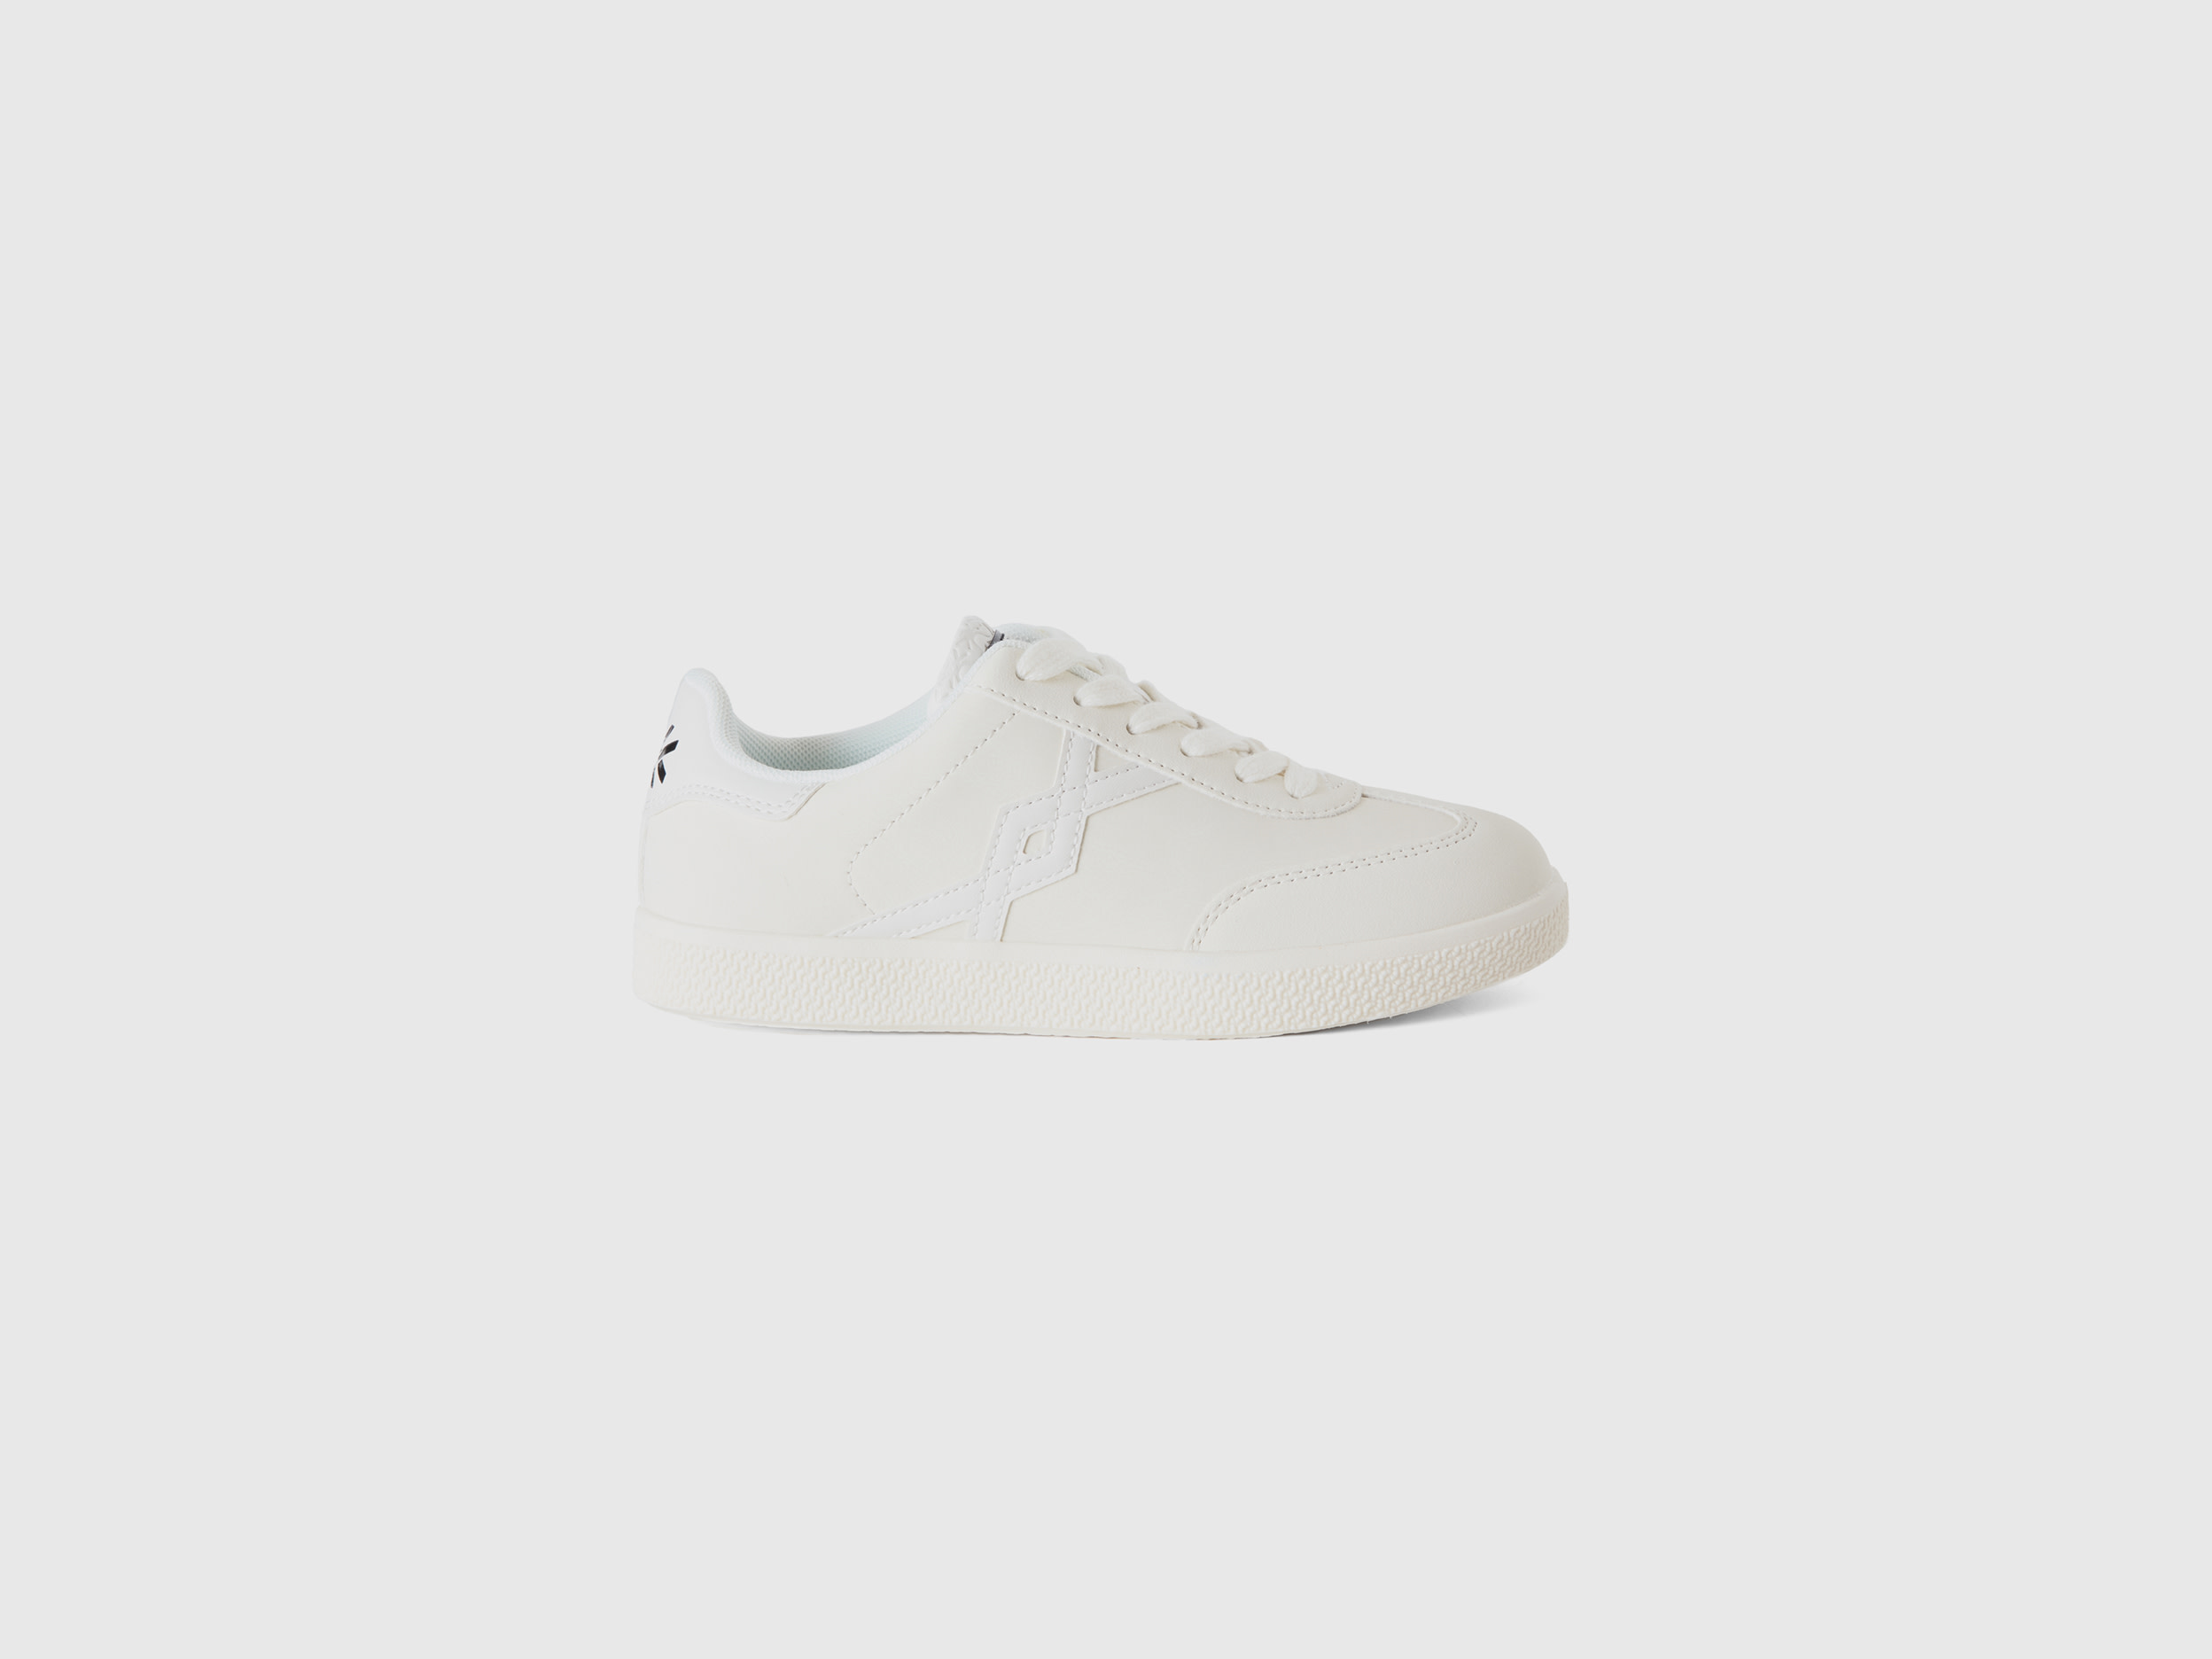 Benetton, Sneakers In Imitation Leather, size 5Y, Creamy White, Kids